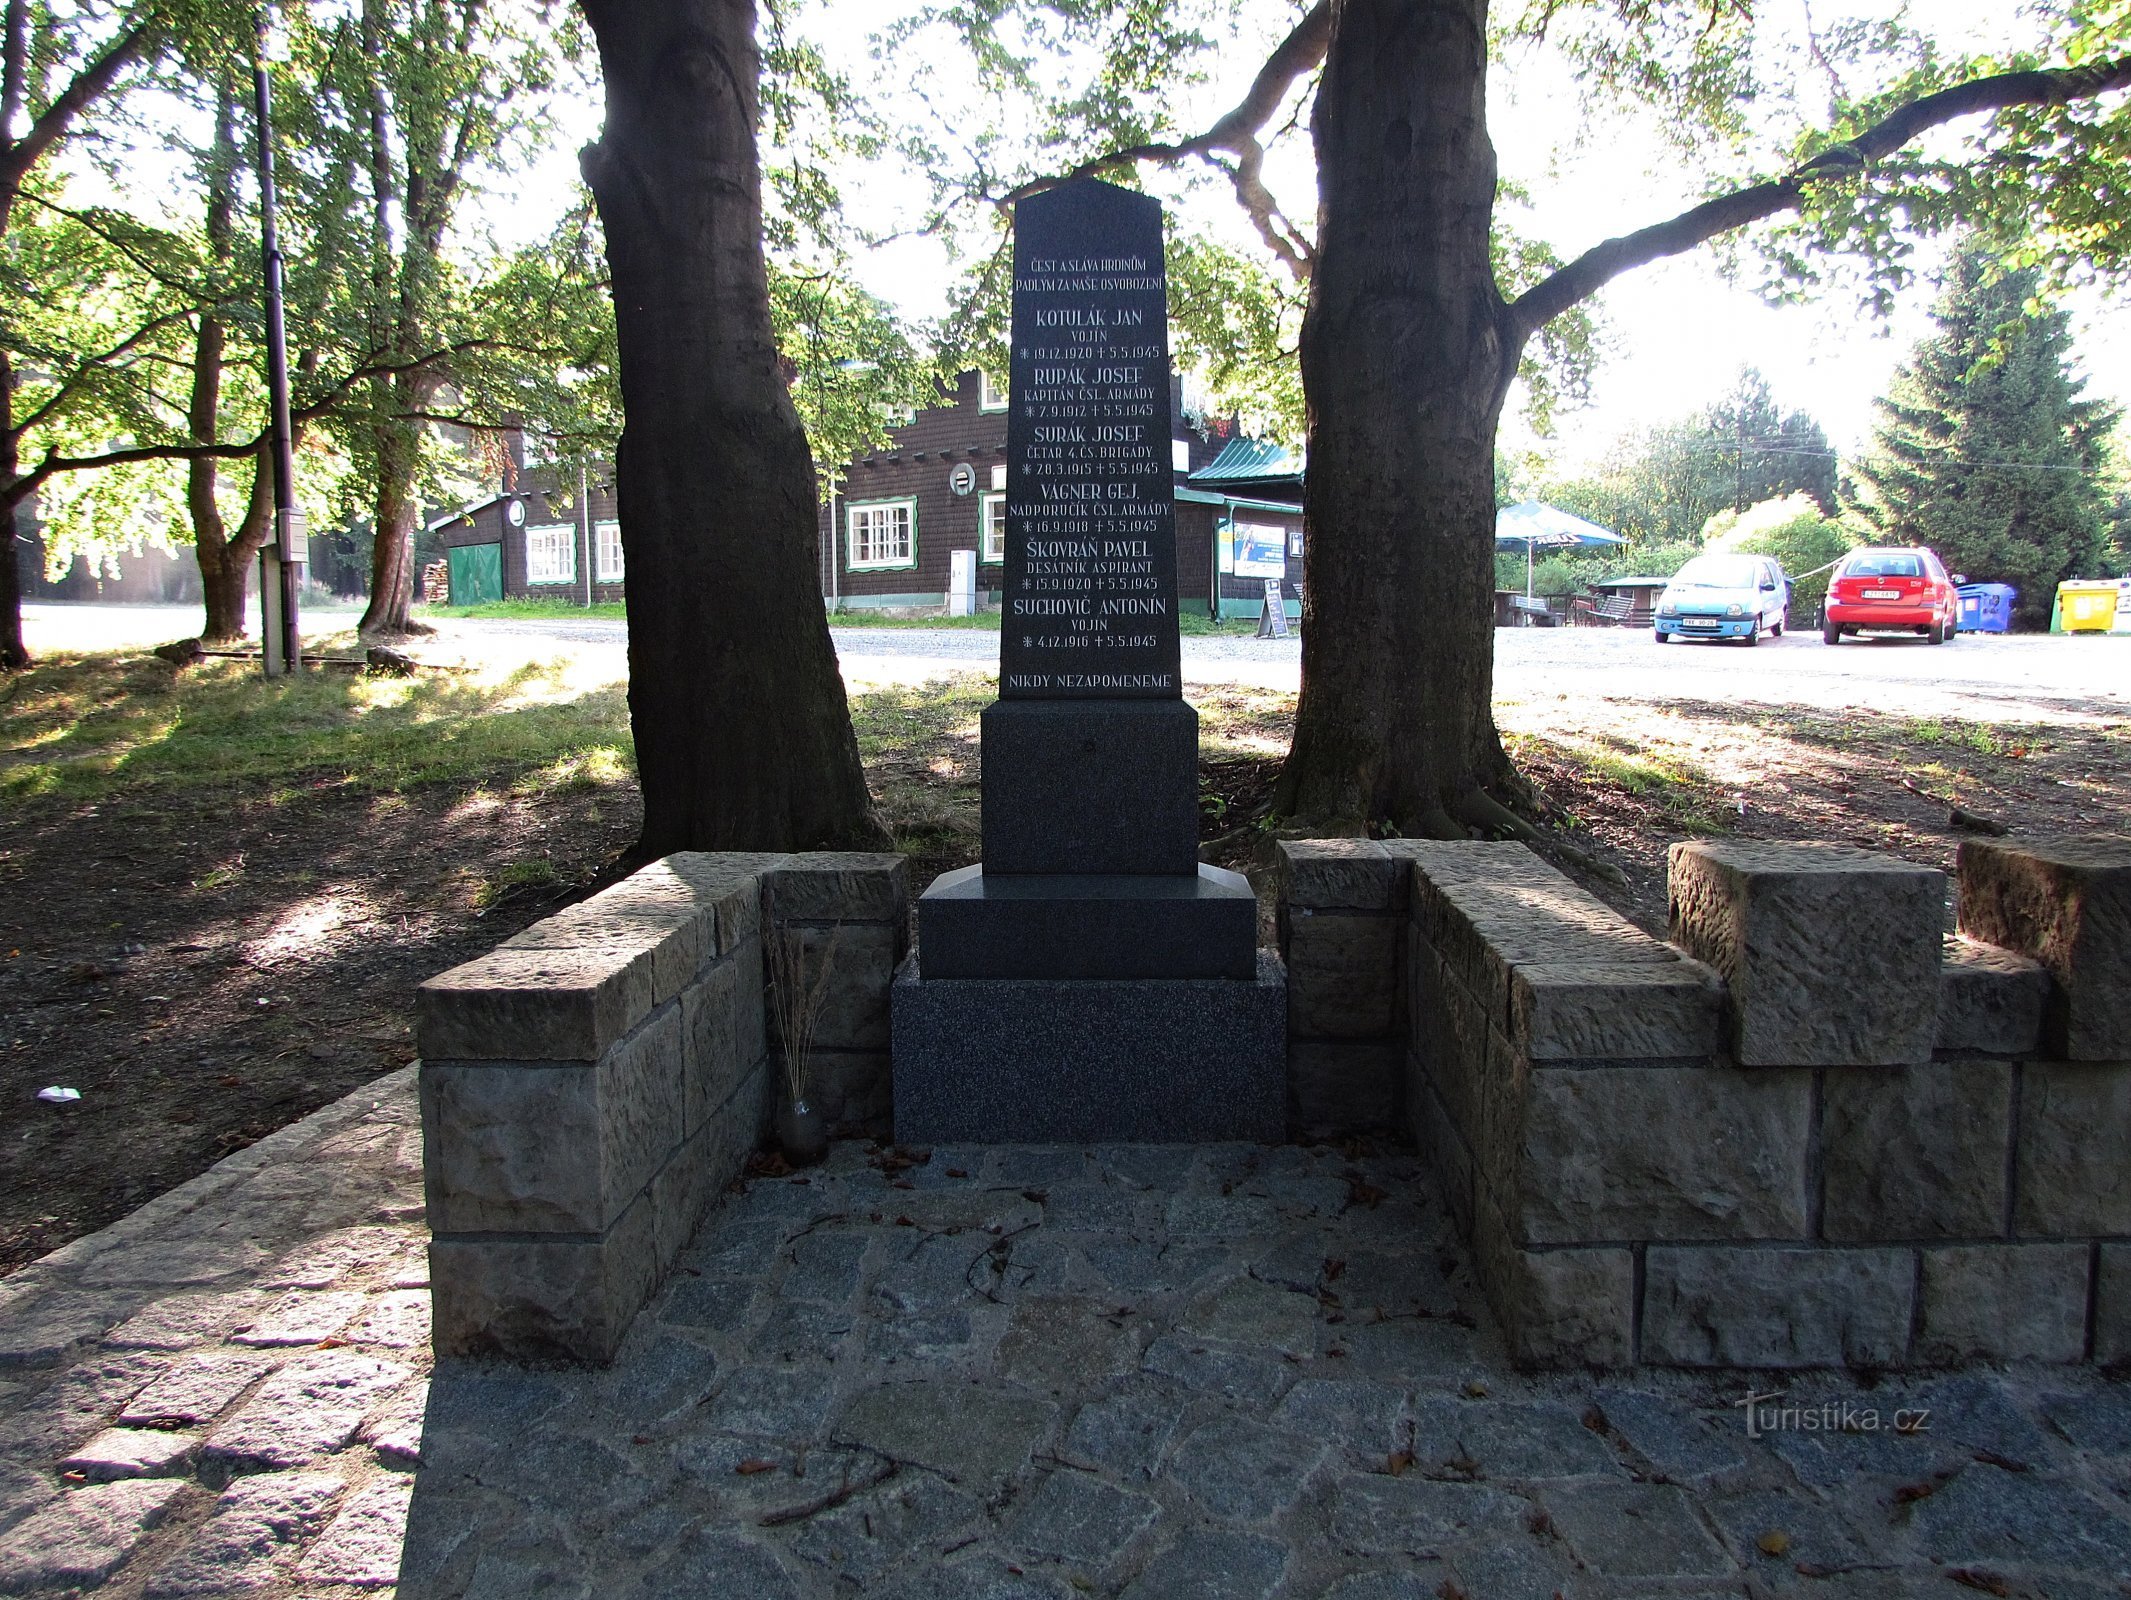 Monument to the fallen